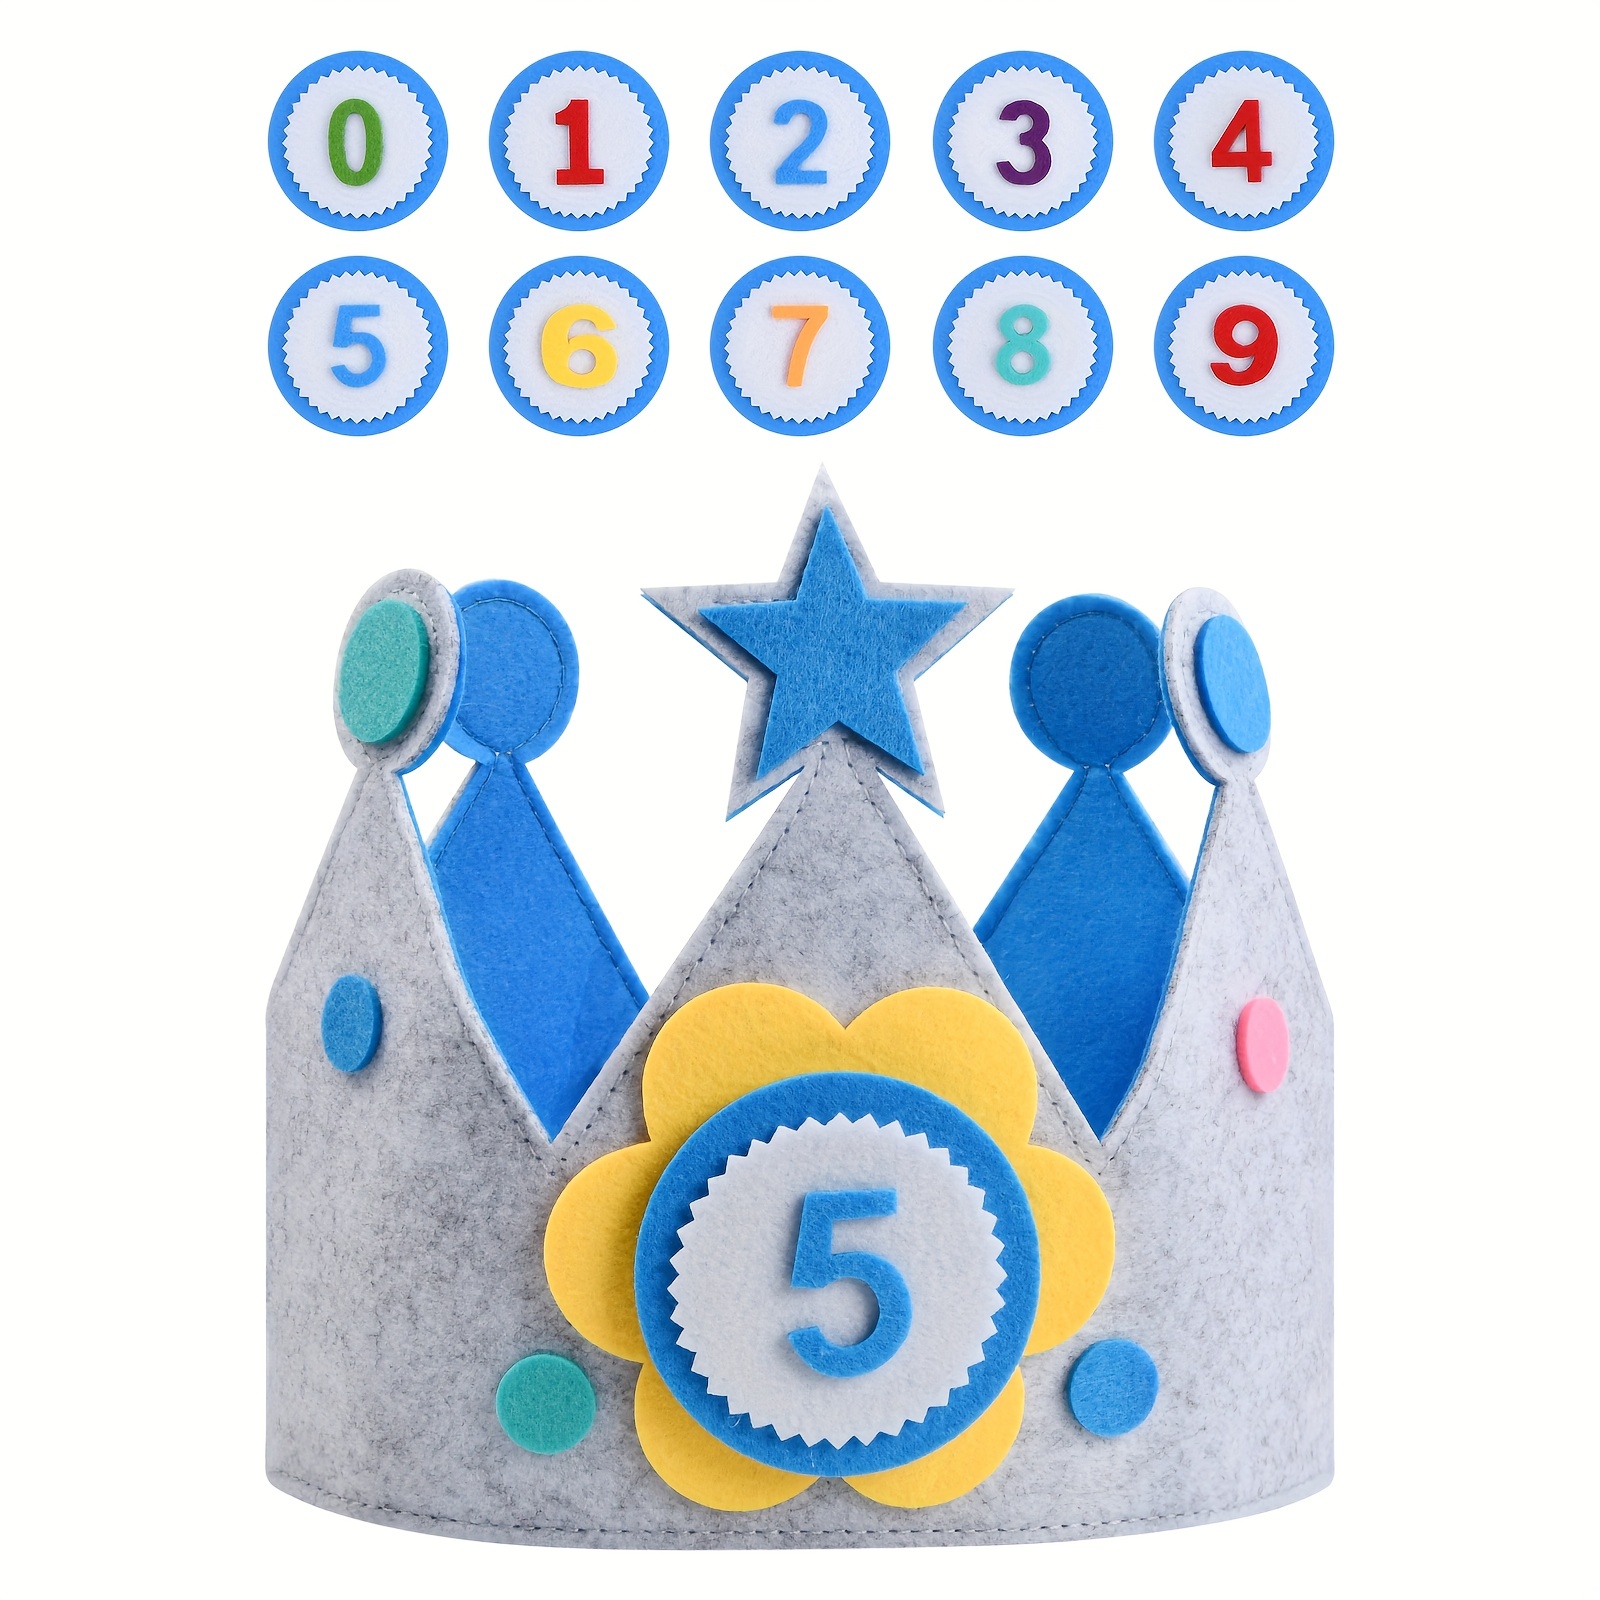 

Set, Birthday Crown, Grey And Blue Happy Birthday Hat, Birthday Crown For Girls And Boys, Reusable Fabric Crown With Interchangeable Numbers 0-9, Daily Party Supplies, Birthday Party Gifts